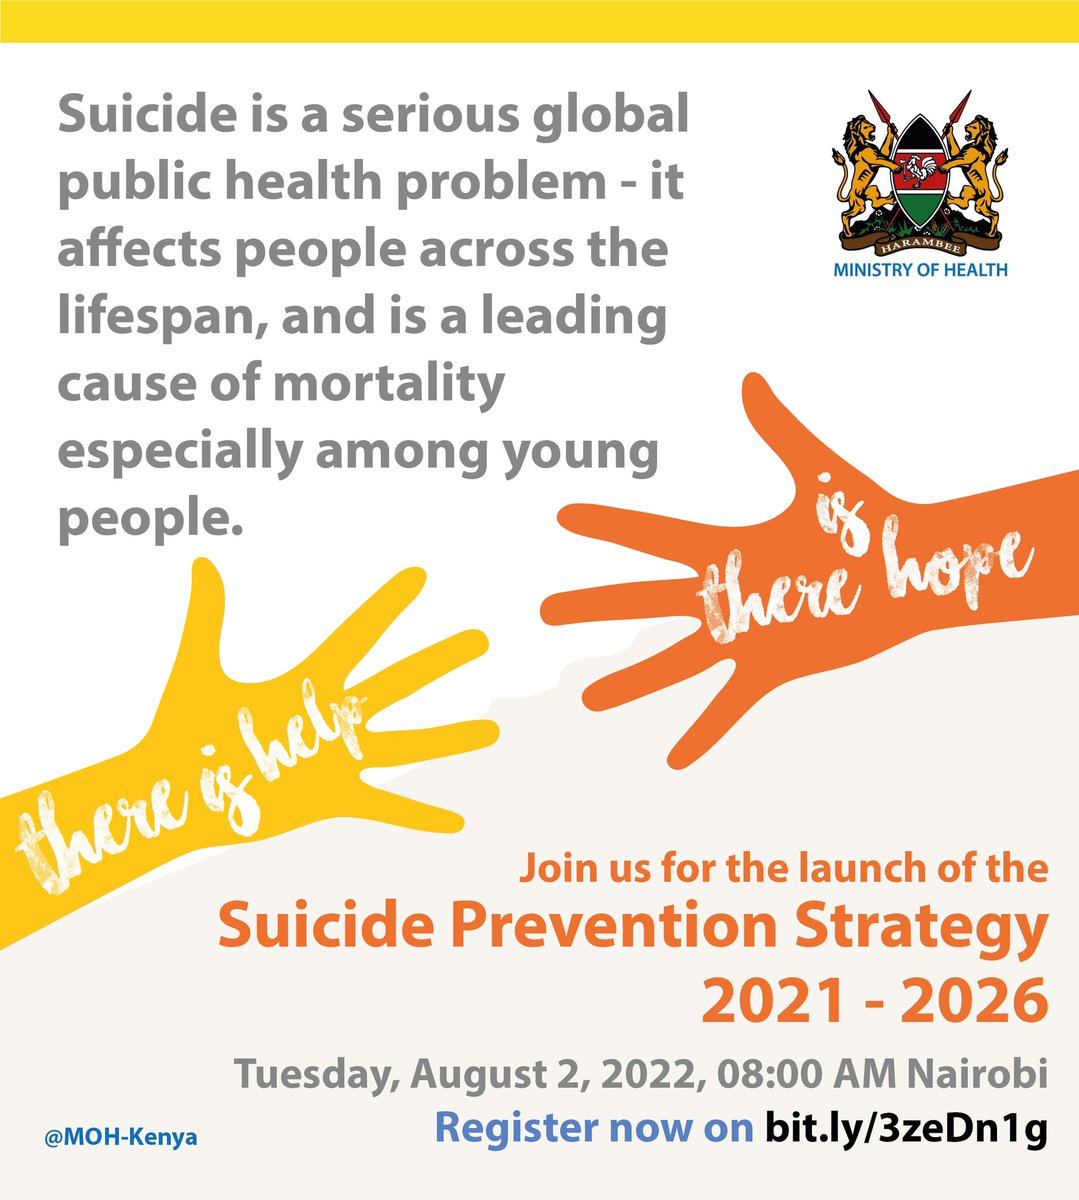 Let's today  join @MOHmentalhealth  in launching the suicide prevention strategy 2021_2026
#sucideprevention
#sucidepreventionstrategy
@BasicNeedsKenya 
@qualityrightske
@Afya_360 
@Difu_Simo 
@AKU_BMI 
@MaryBitta 
@Eliezer_KE 
@dennism_musyoki